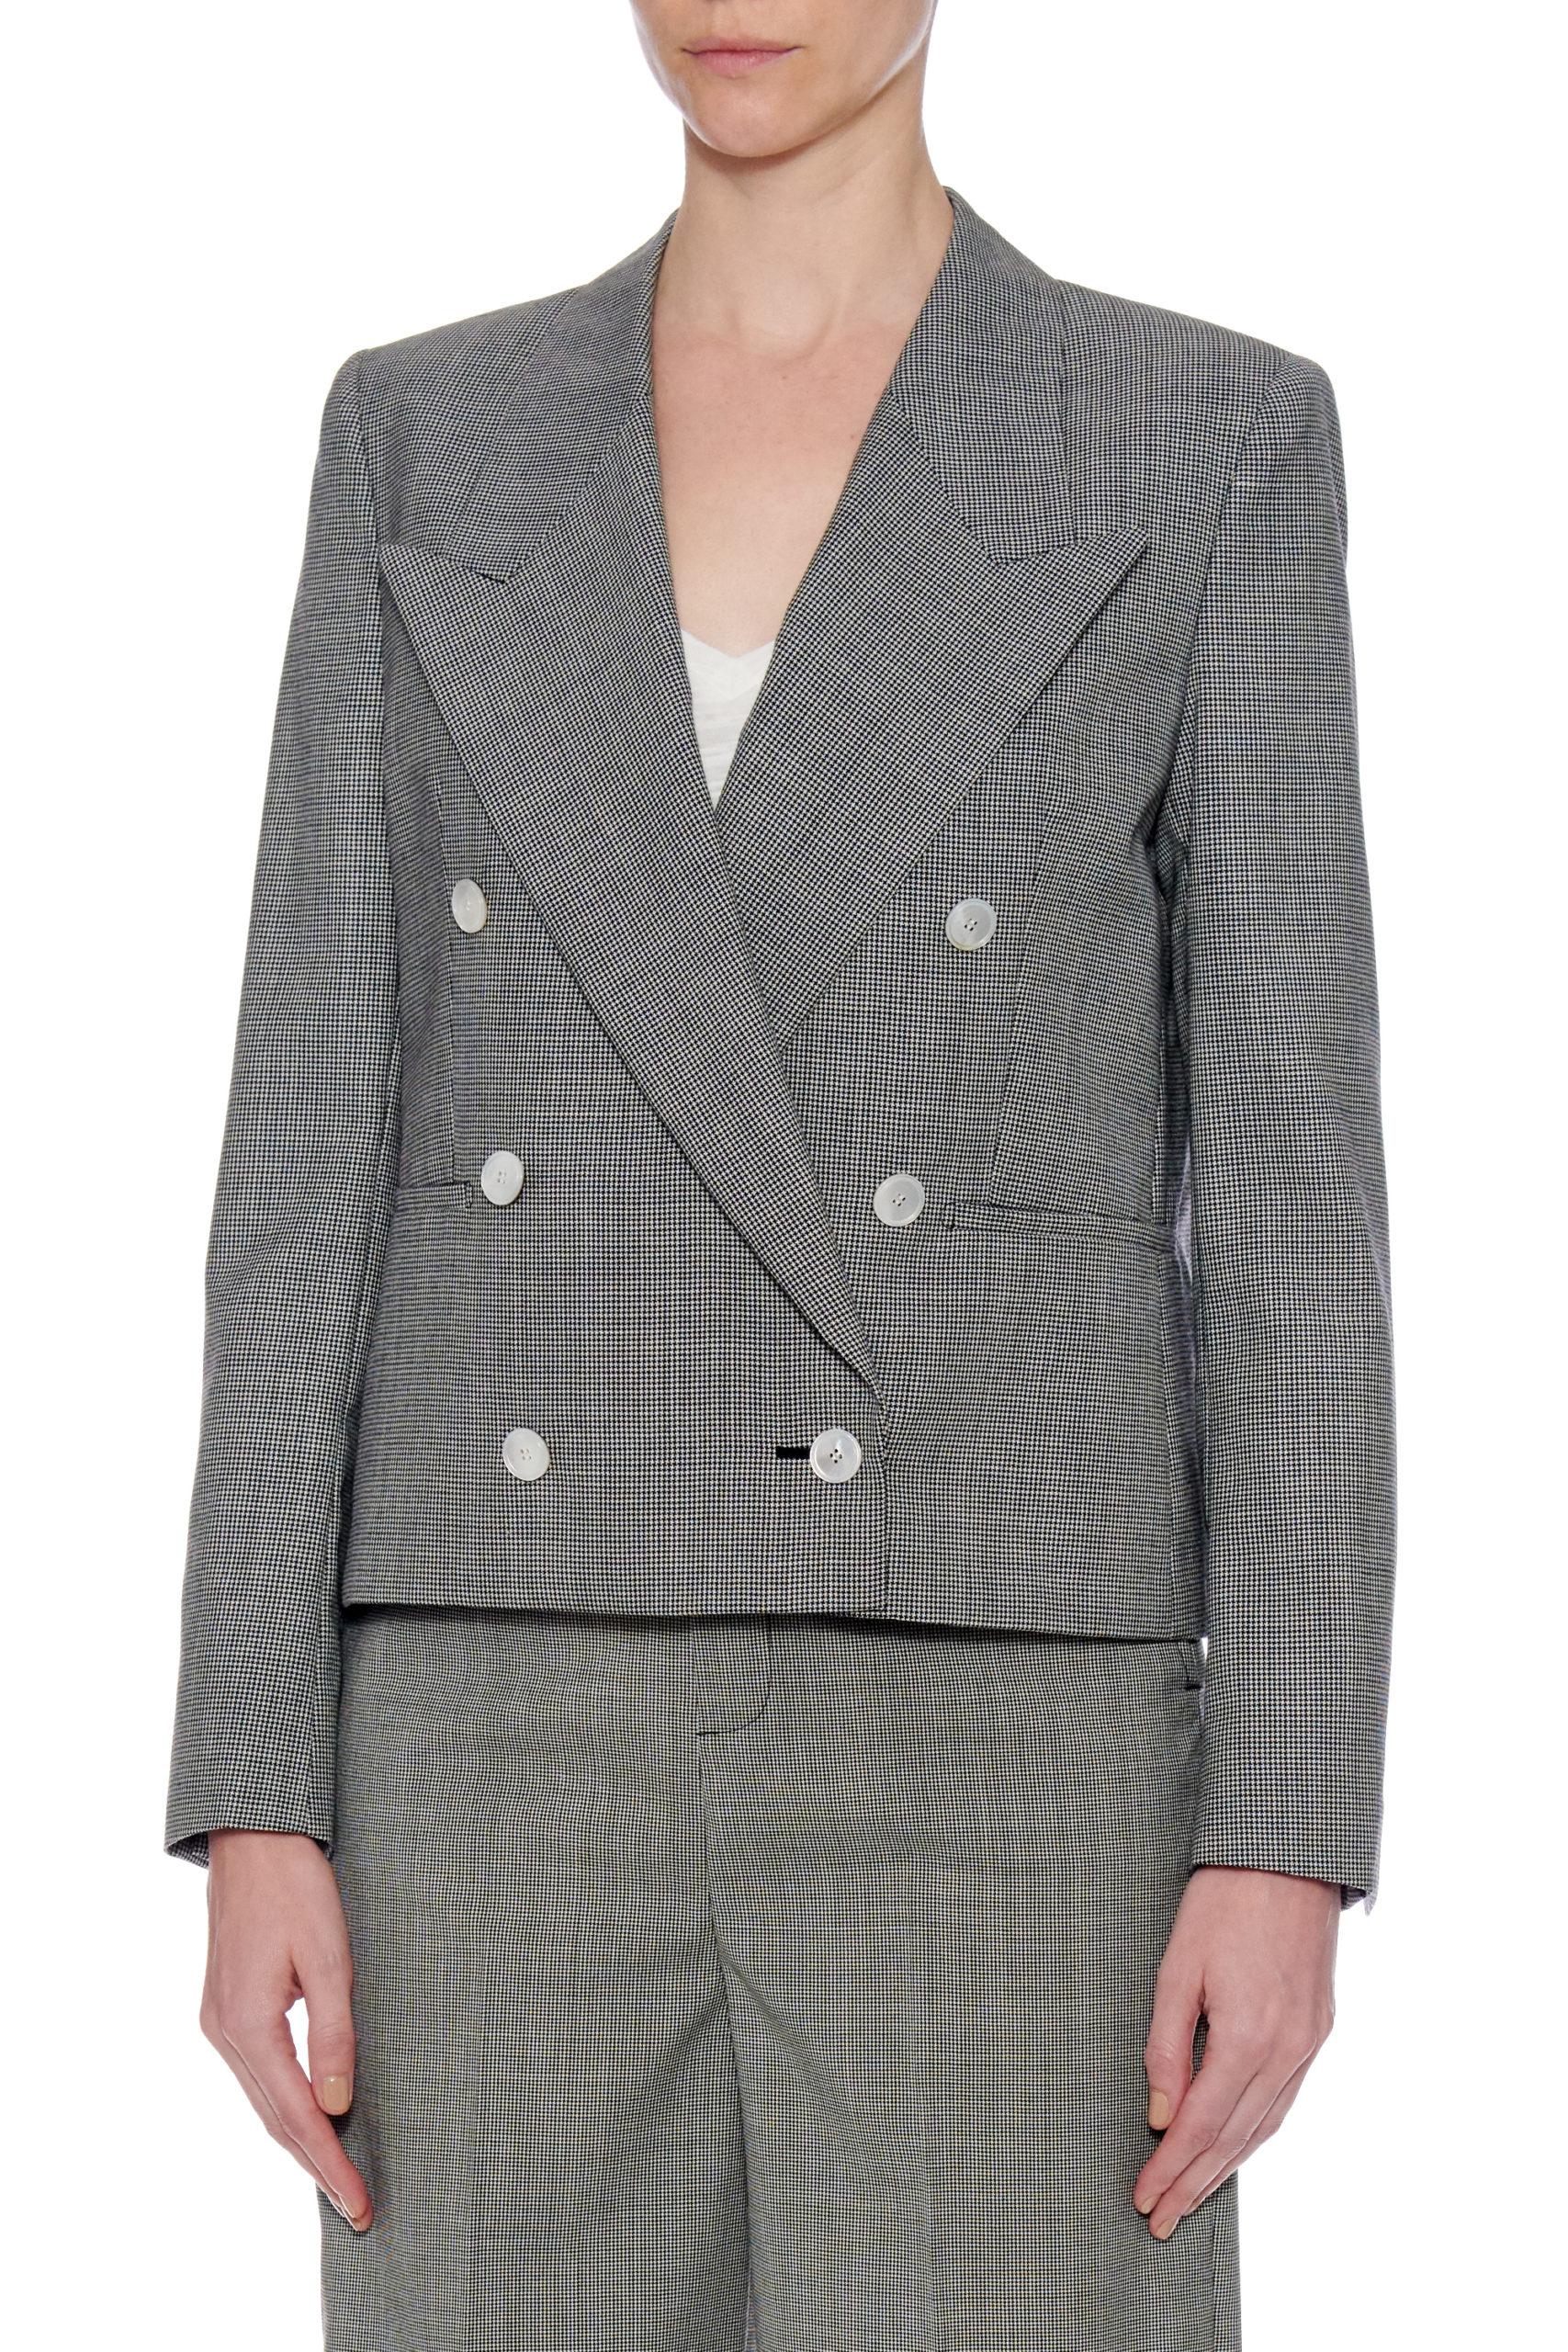 Oviedo Jacket – Peaked lapels, double breasted jacket in houndstooth0